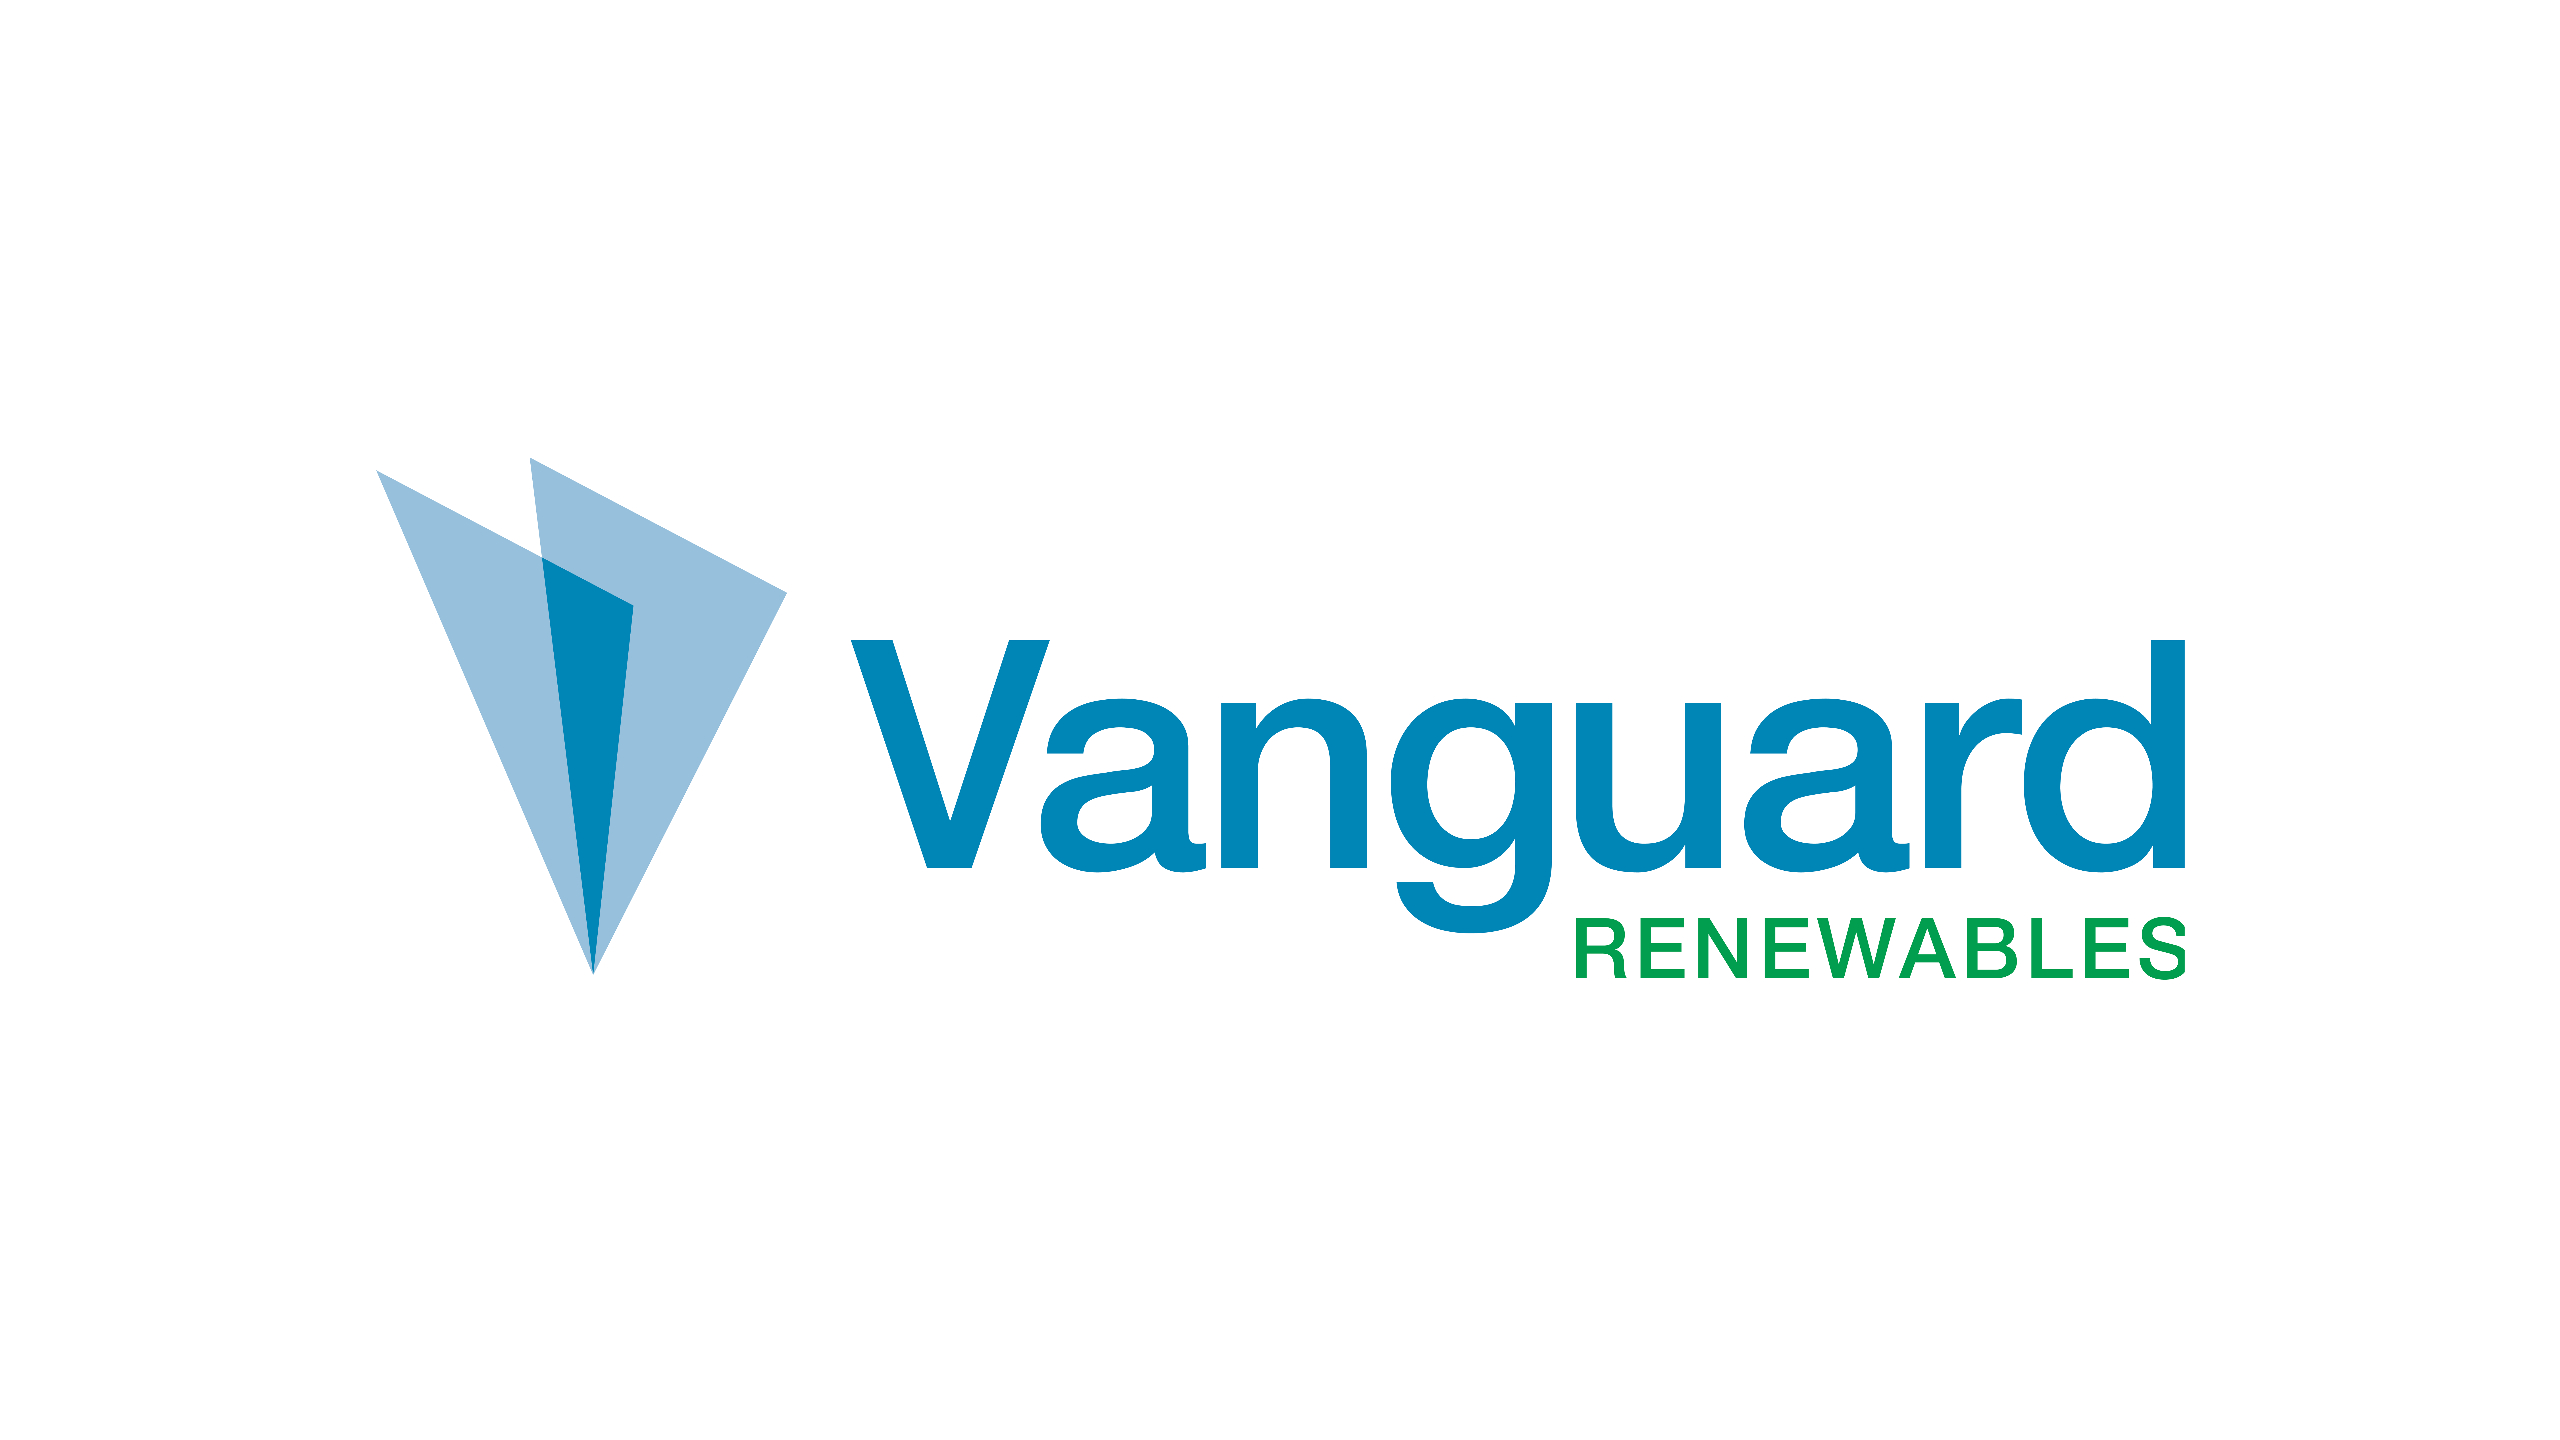 This is a photo of the Vanguard Renewables logo.